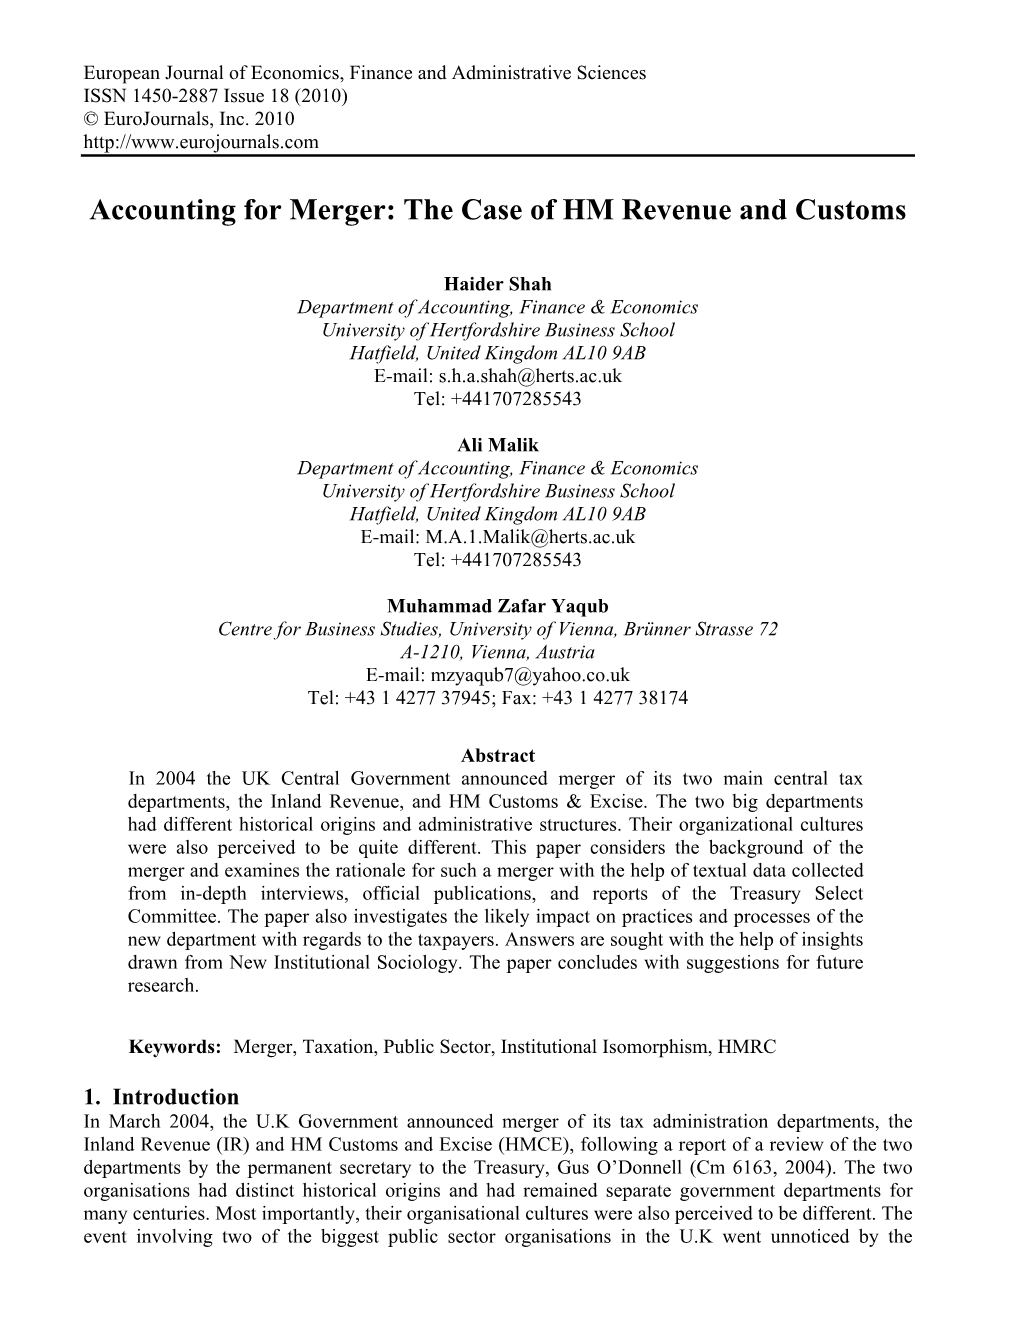 Accounting for Merger: the Case of HM Revenue and Customs